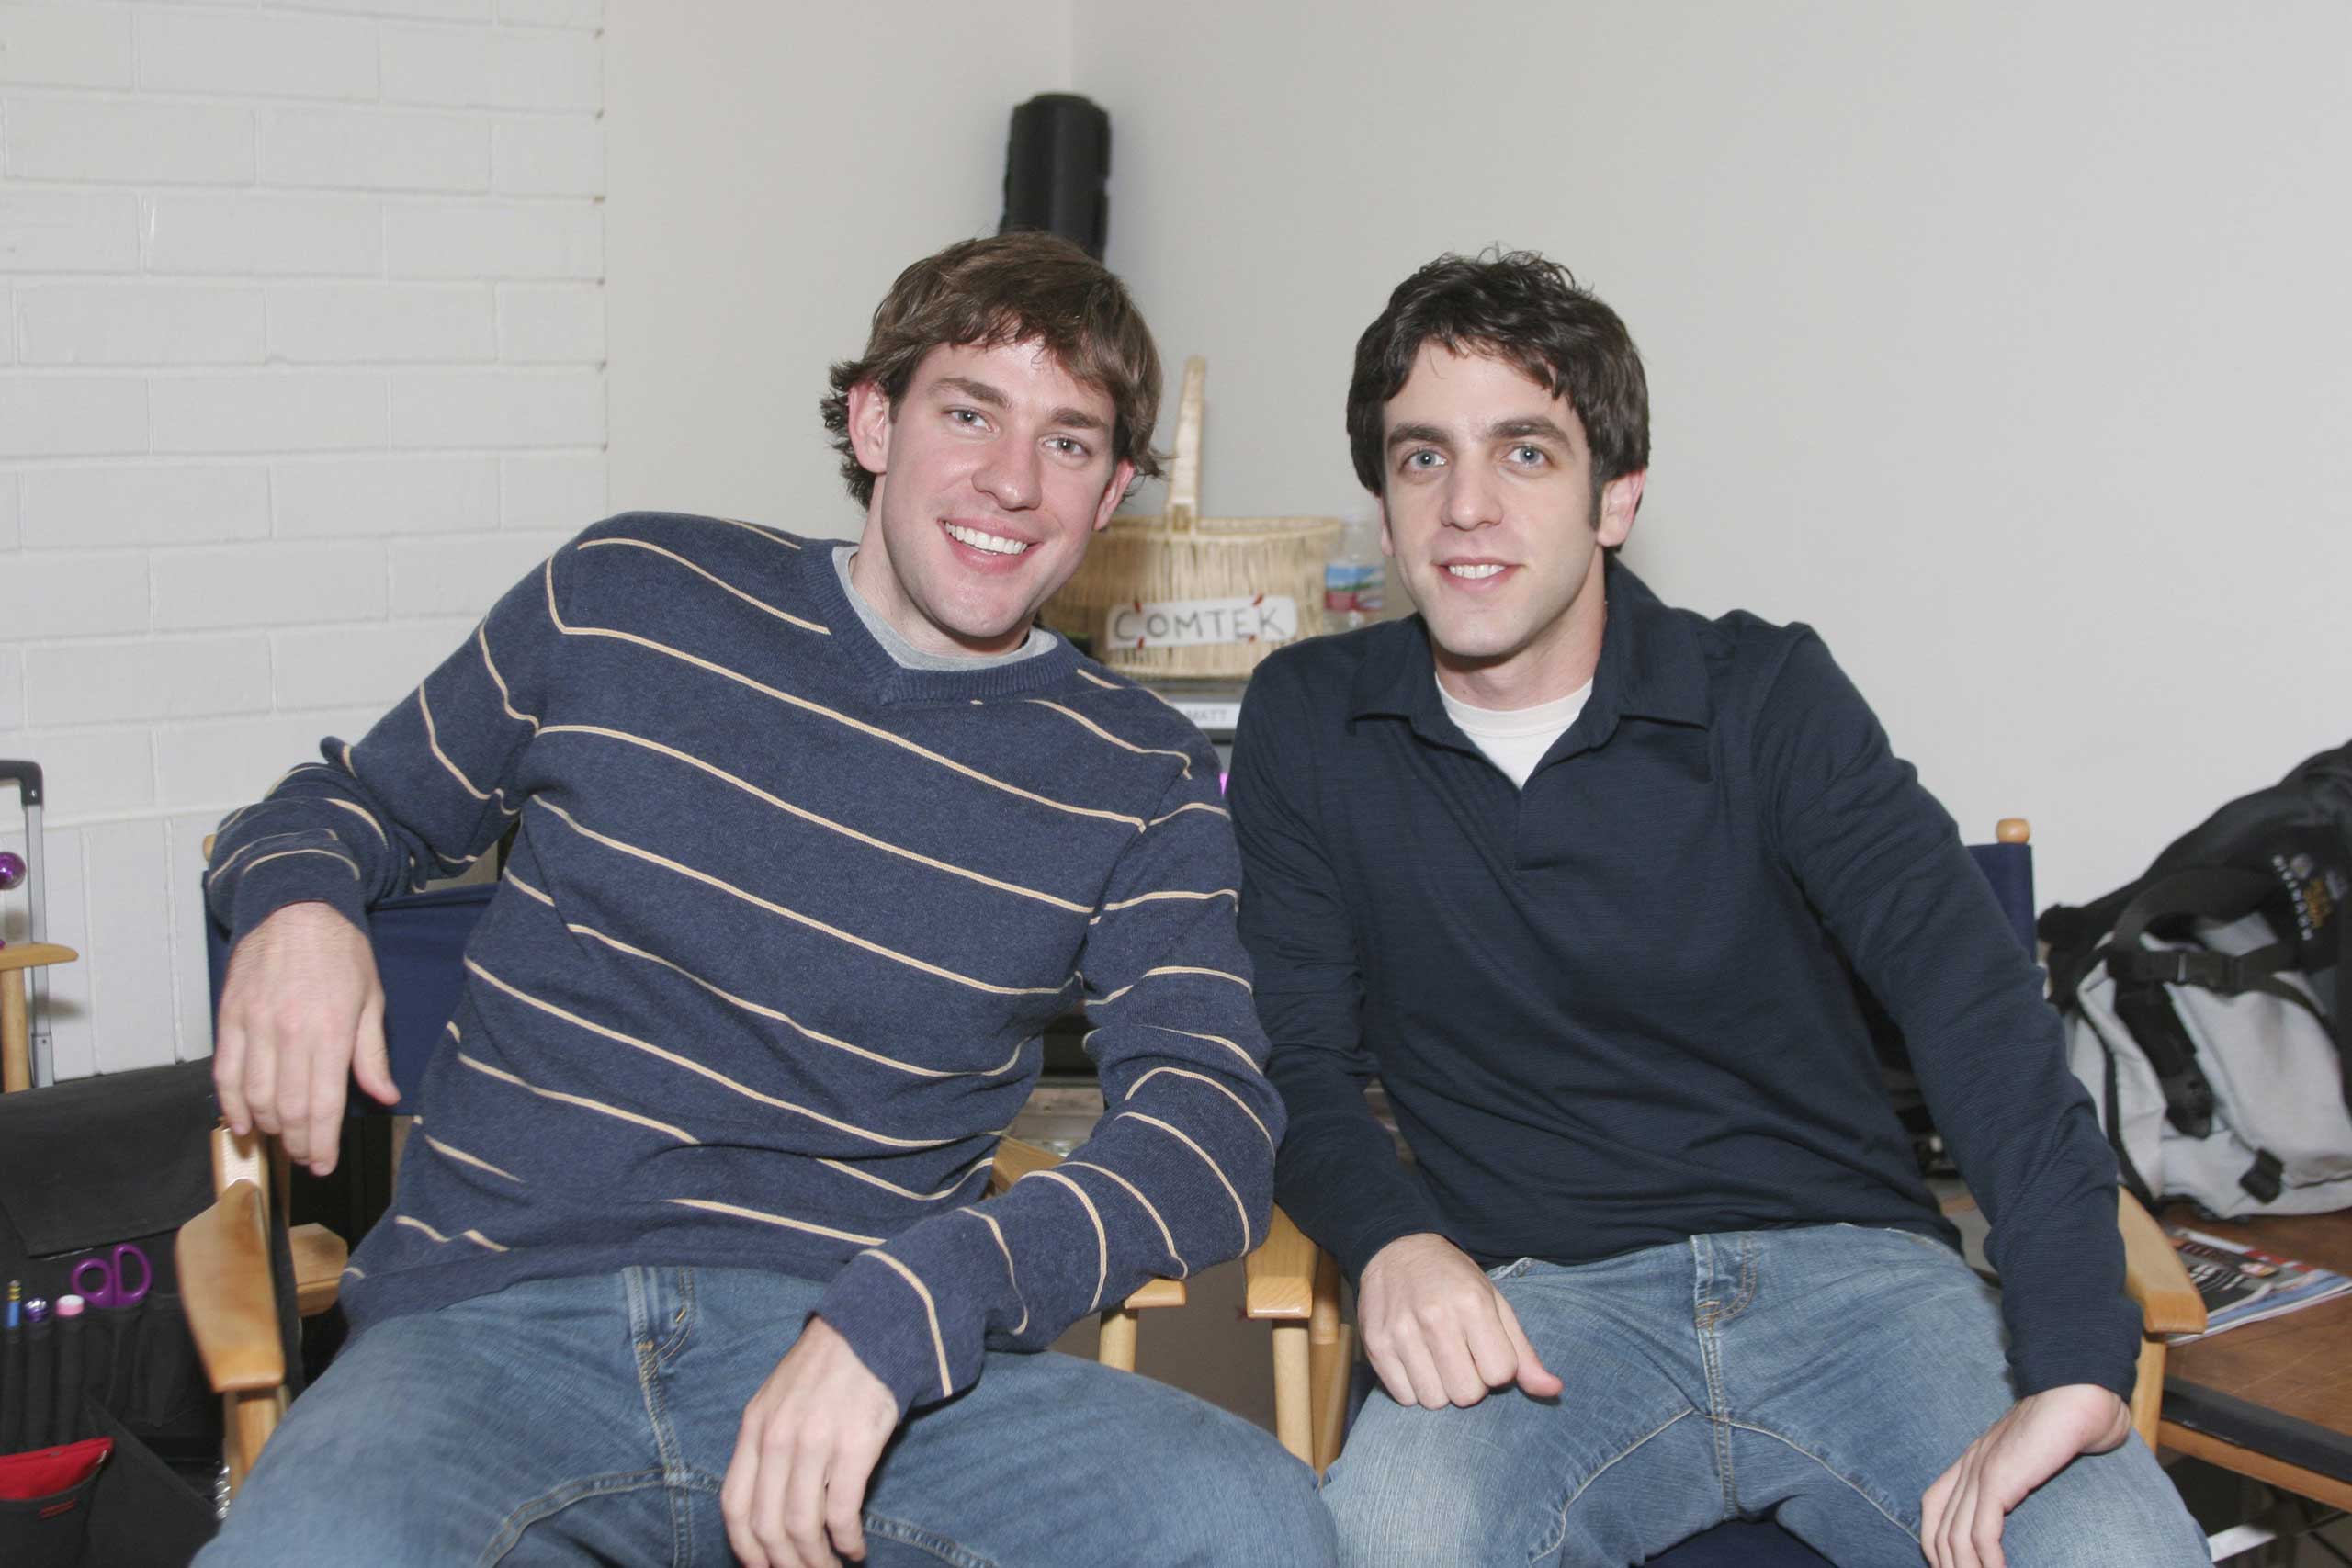 It's not surprising that 'Office' co-stars John Krasinski and B.J. Novak are friends, but that they've been friends for so long: since little league.